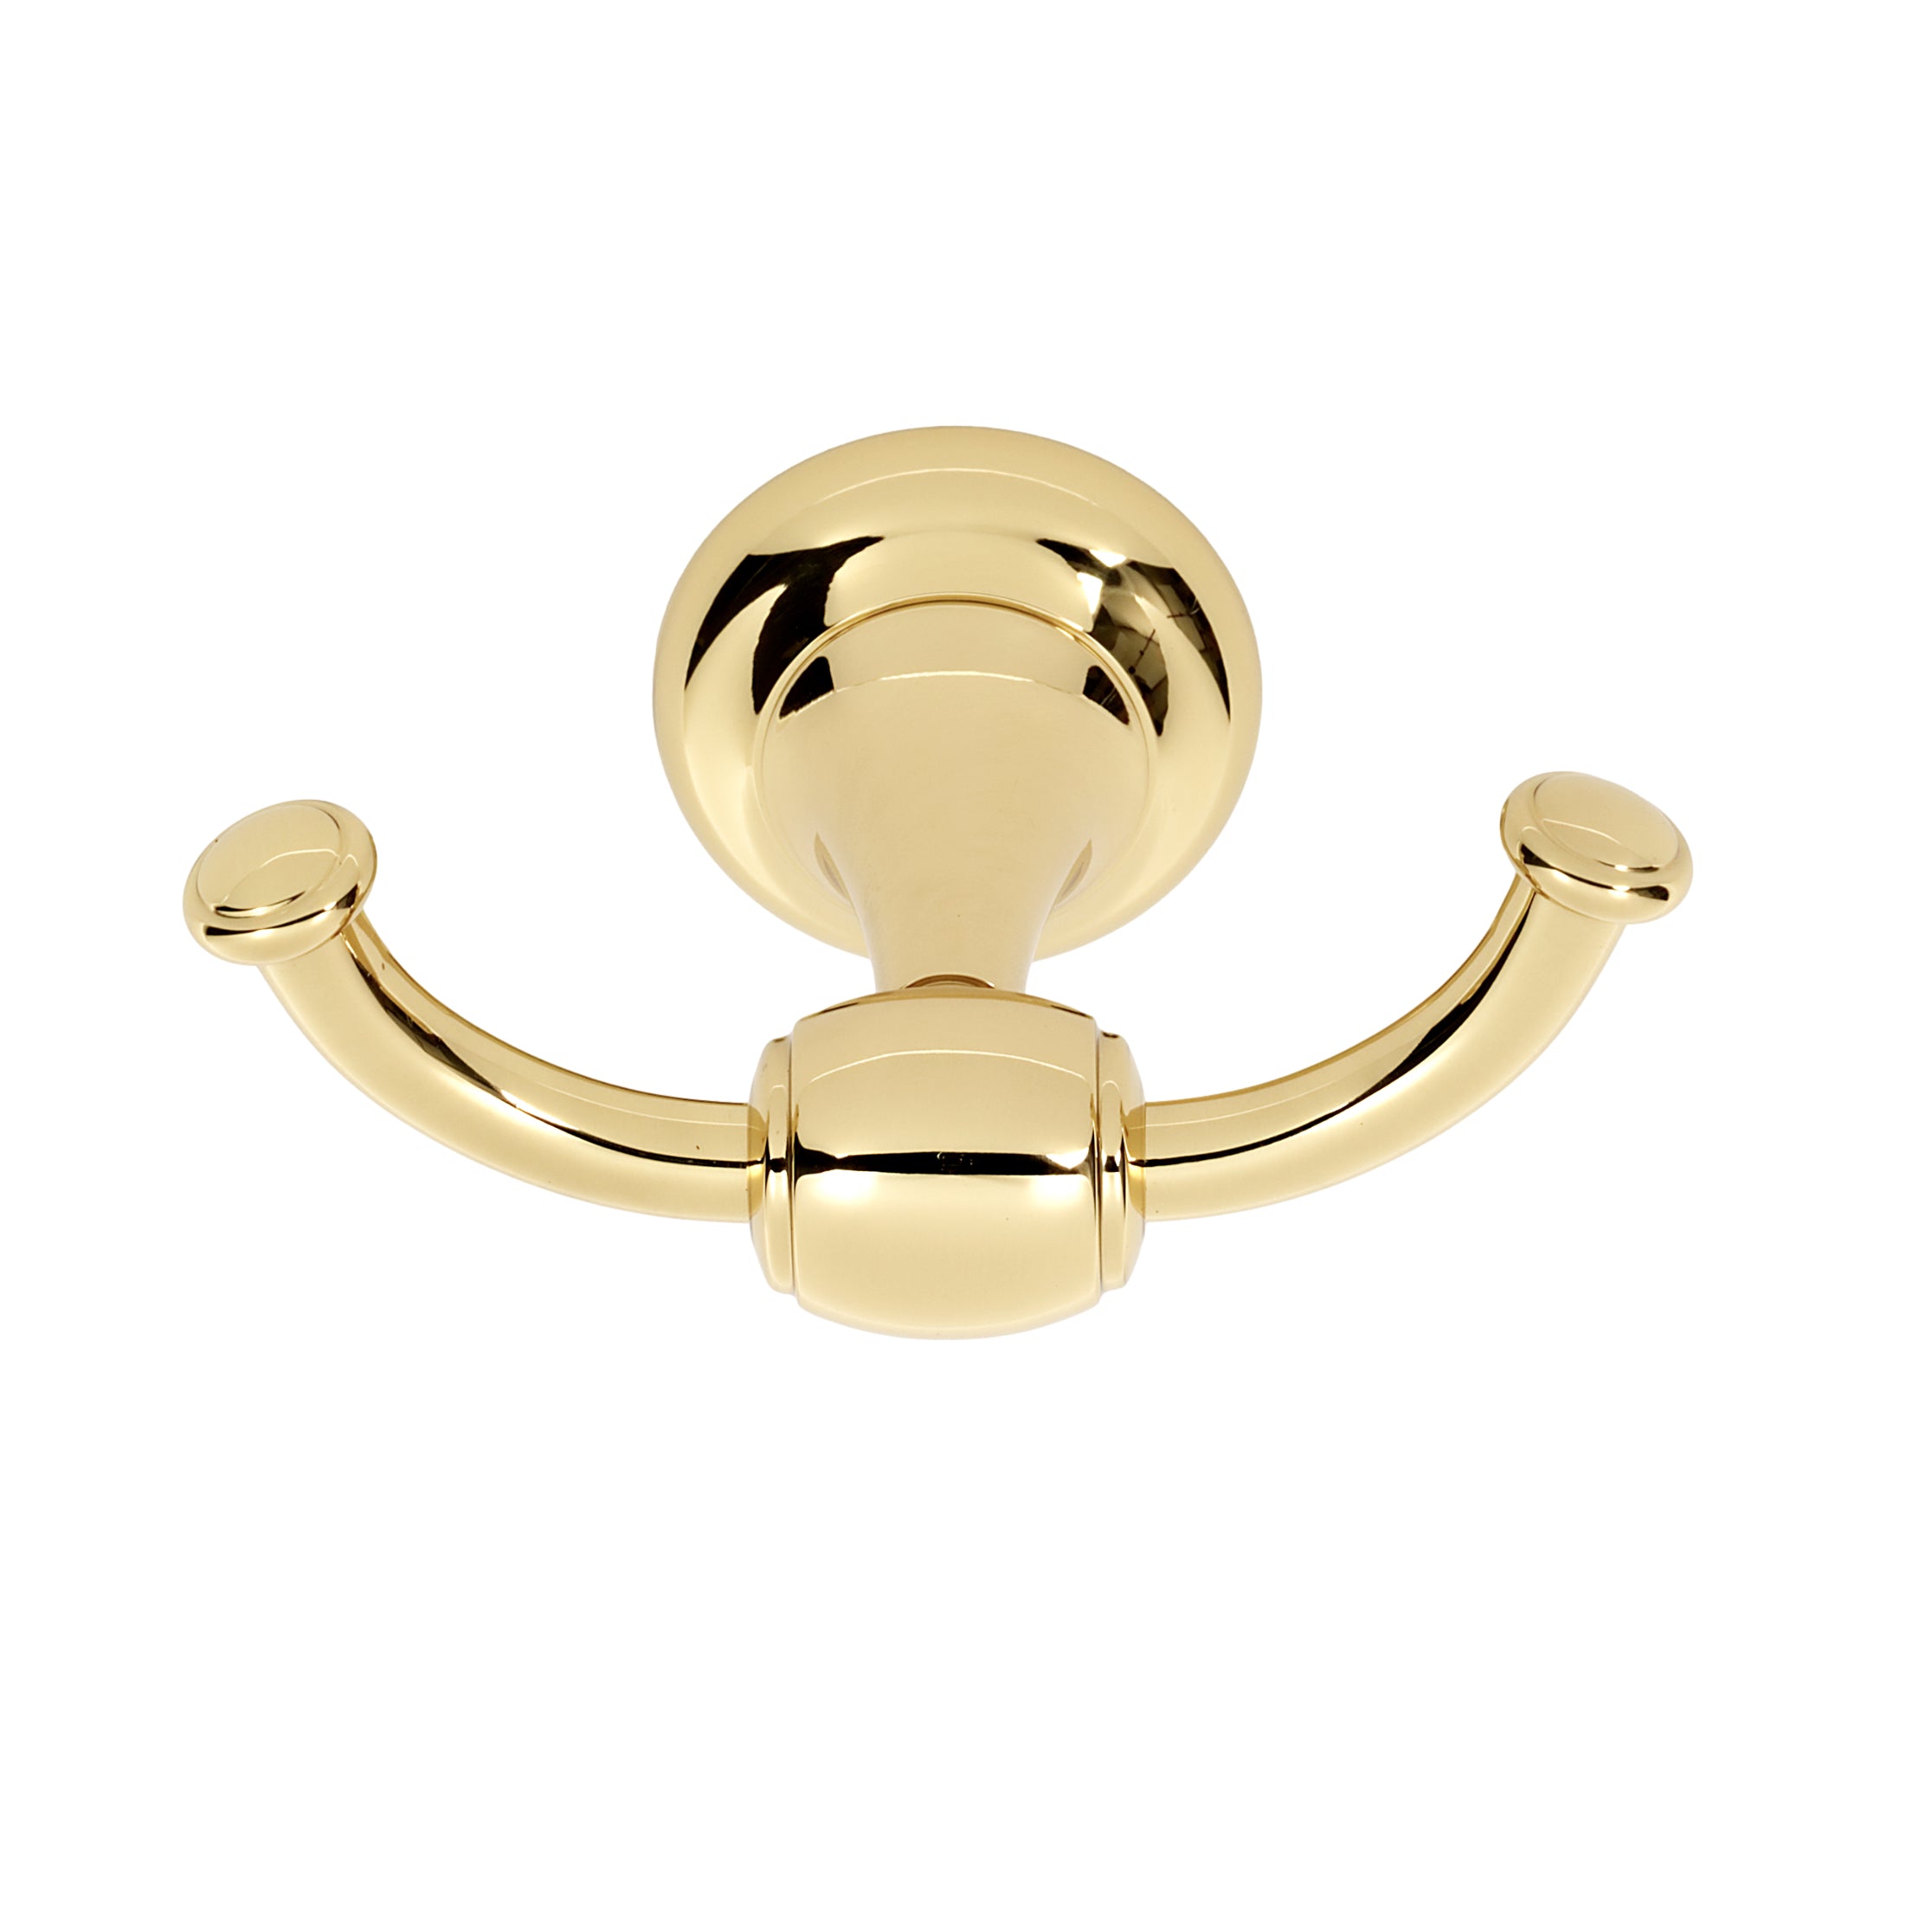 Alno A6684 Royale Double Robe Hook - Unlacquered Brass